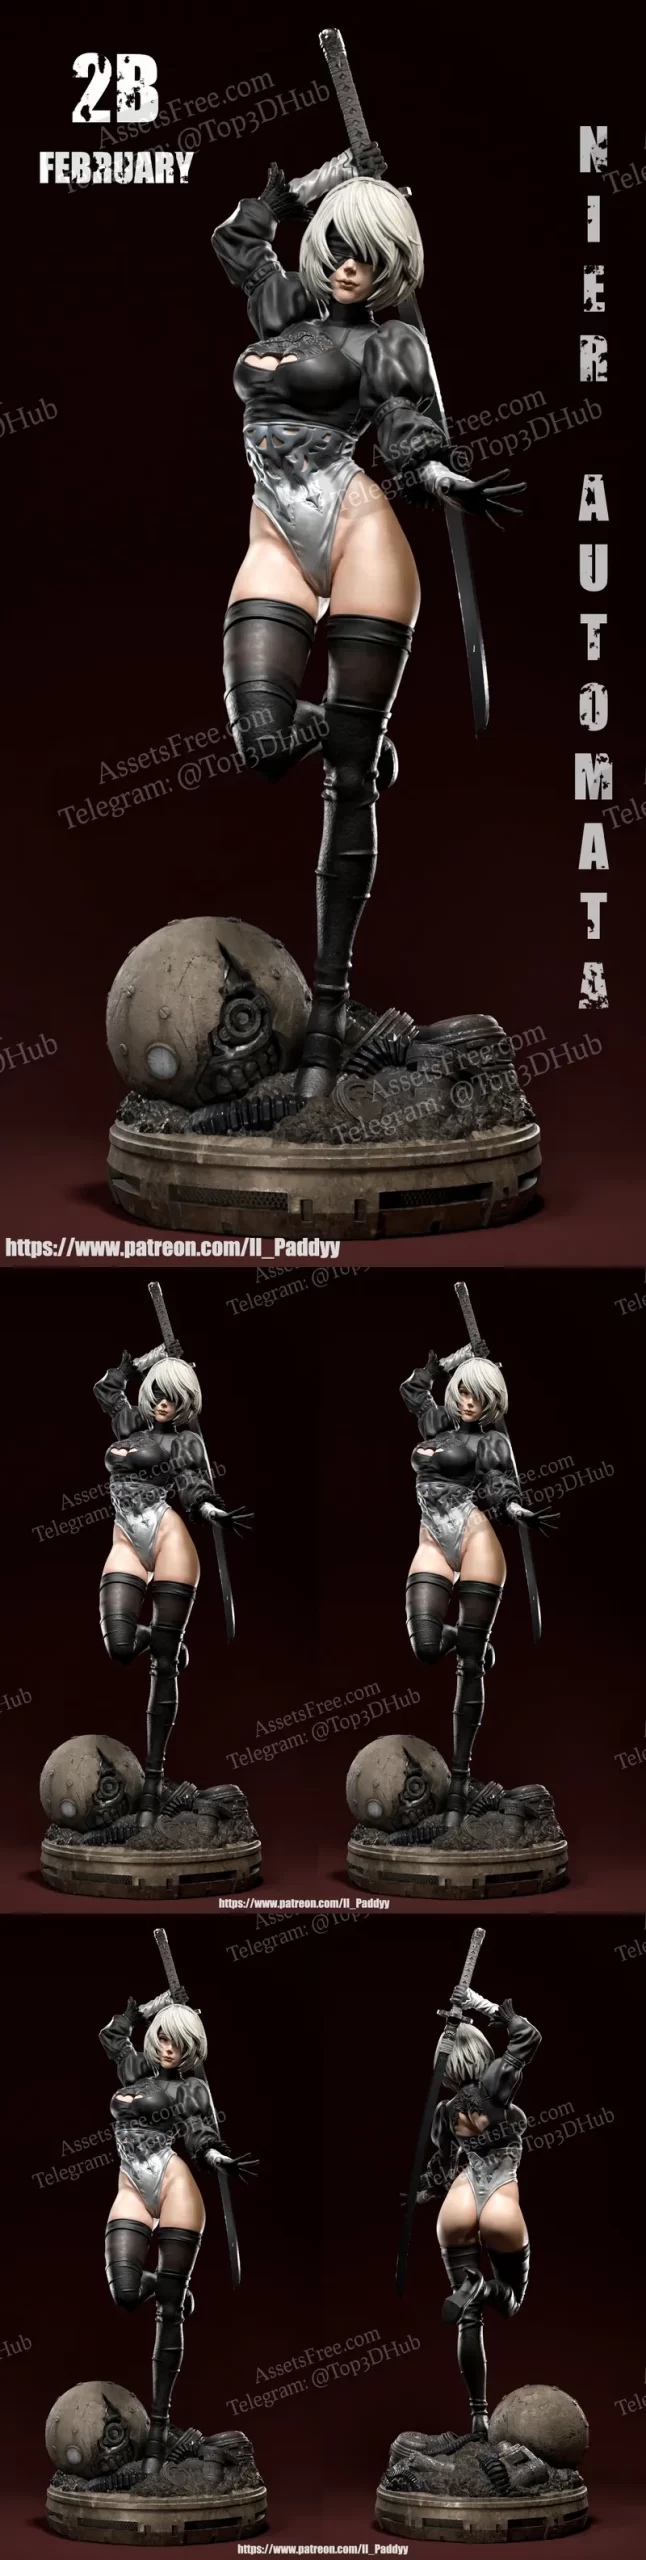 Enter the World of Androids: 2B from NieR: Automata - A Futuristic 3D Model Tribute